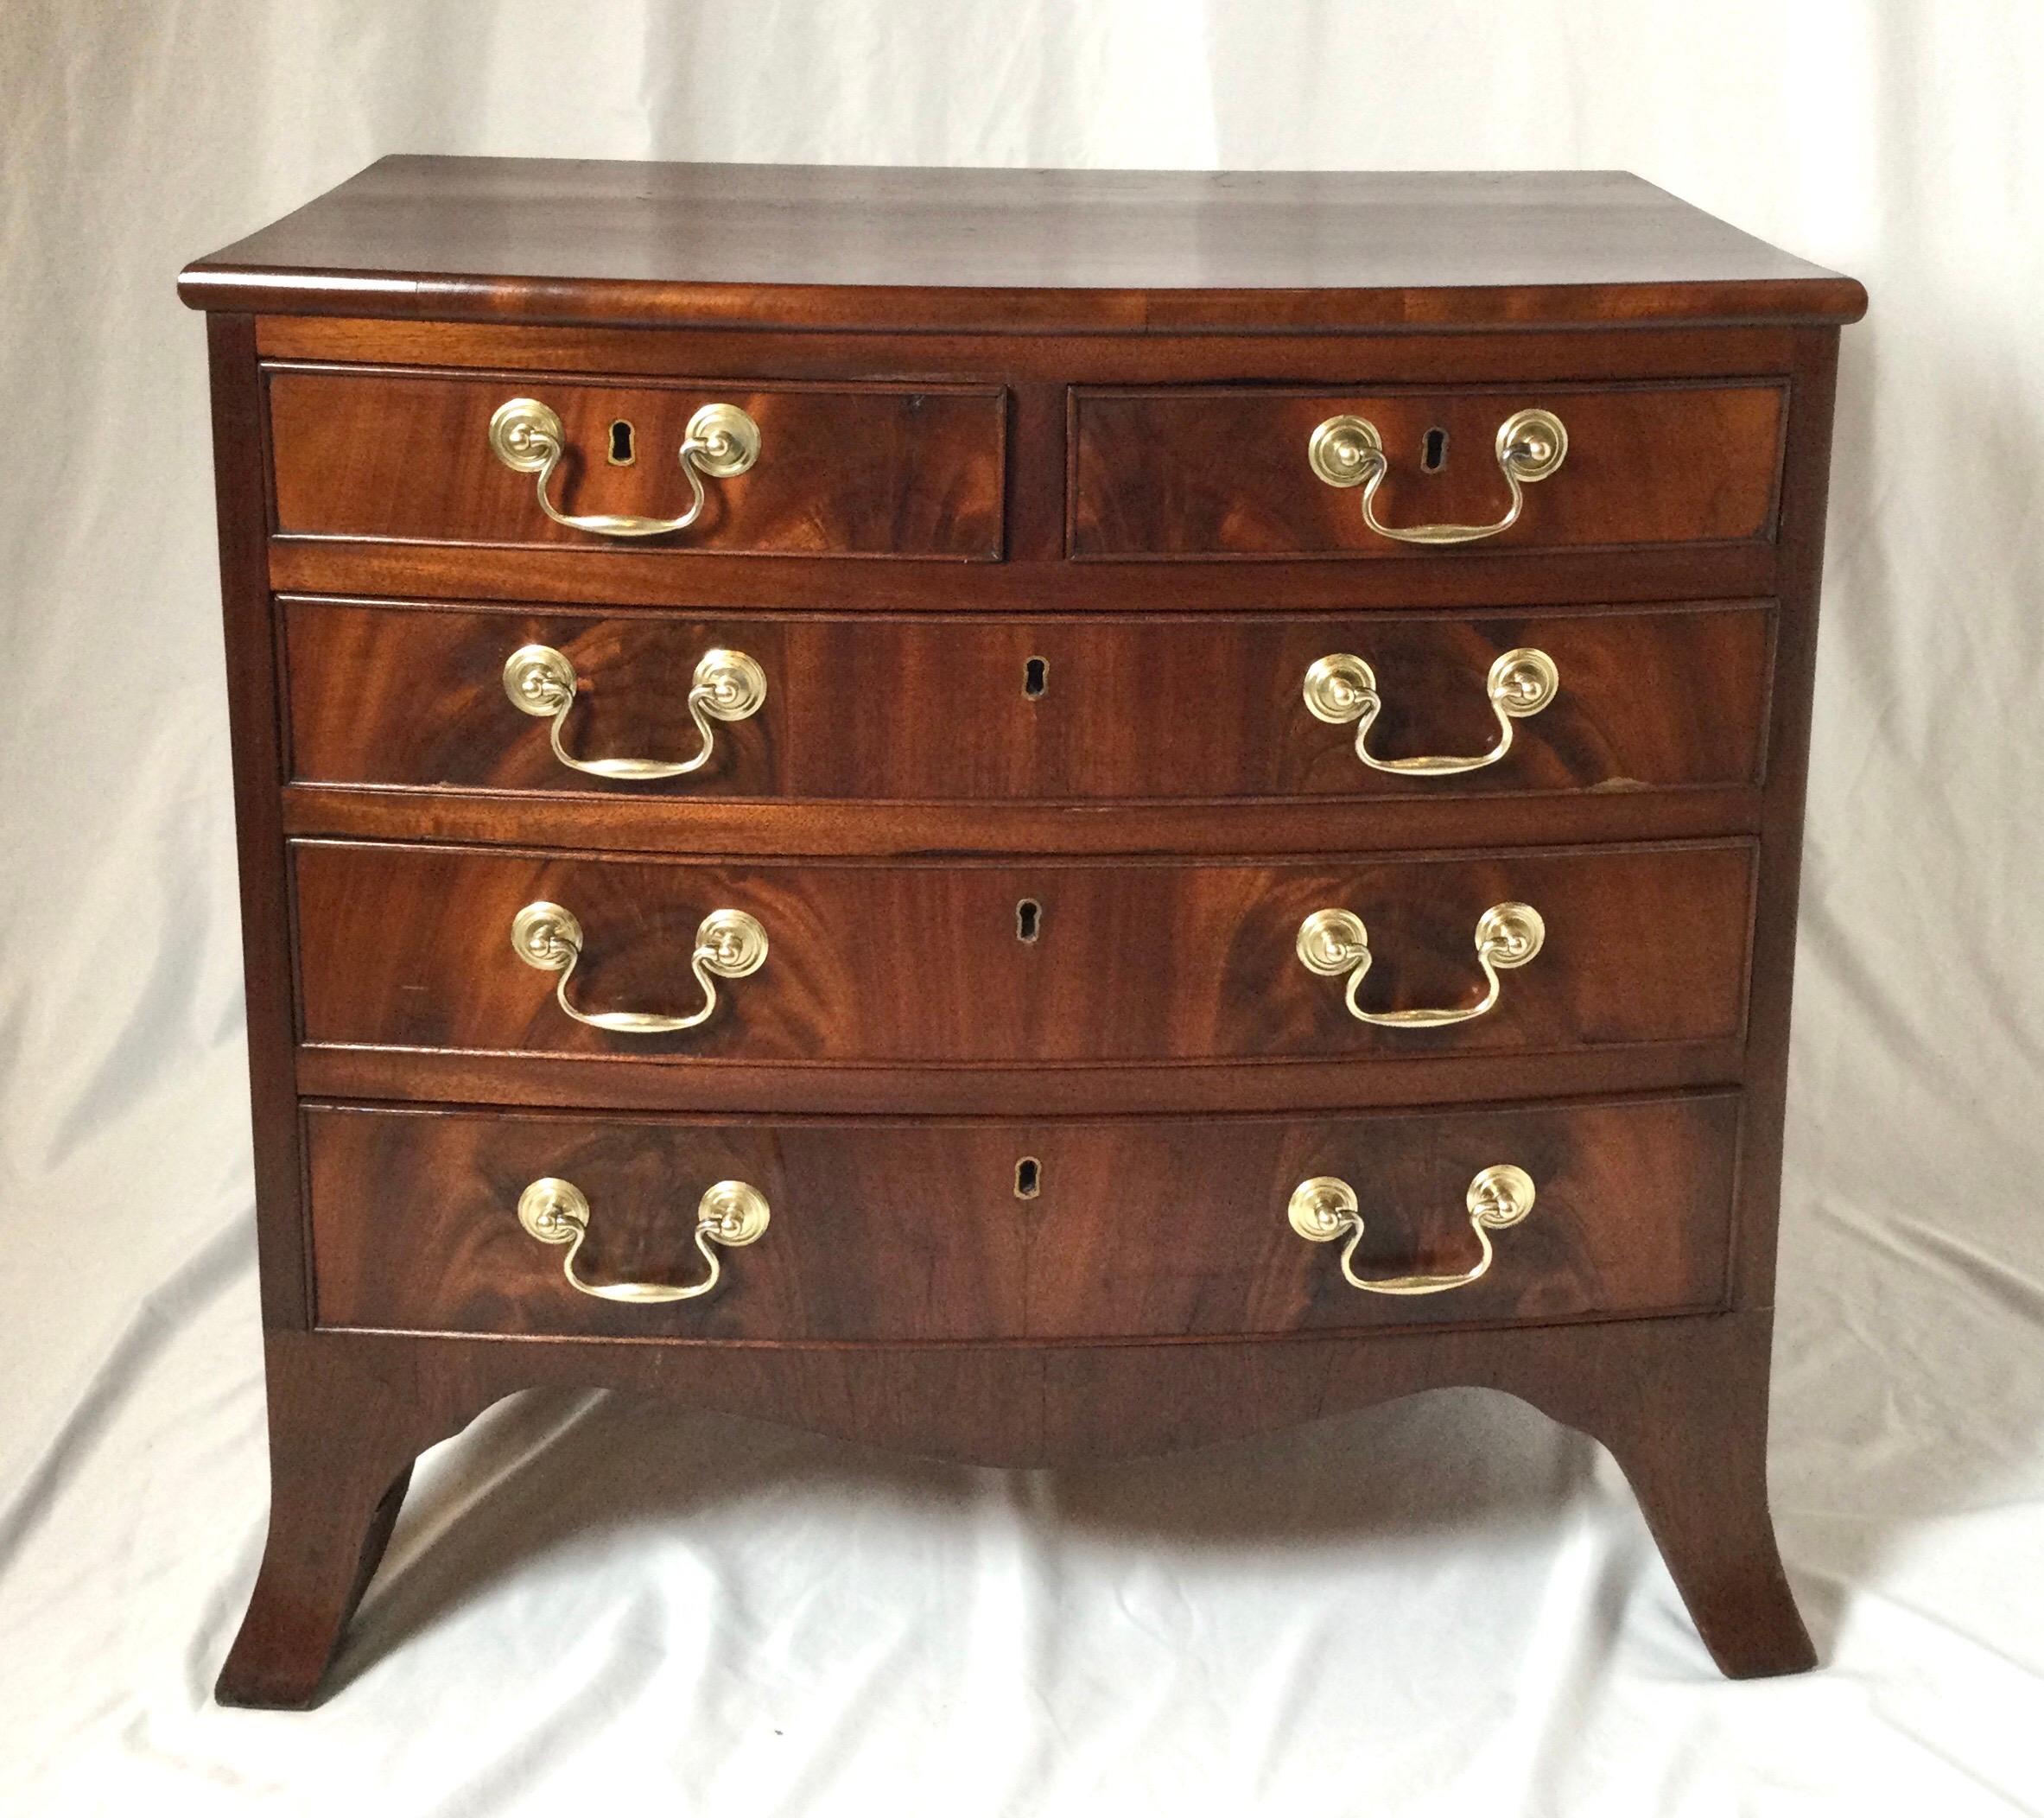 An elegant smaller solid mahogany chest of drawers with original brass hardware. The two drawers over three larger drawers resting on four splayed bracket feet. The finish has been refreshed around 50 years ago and remains in very good well cared